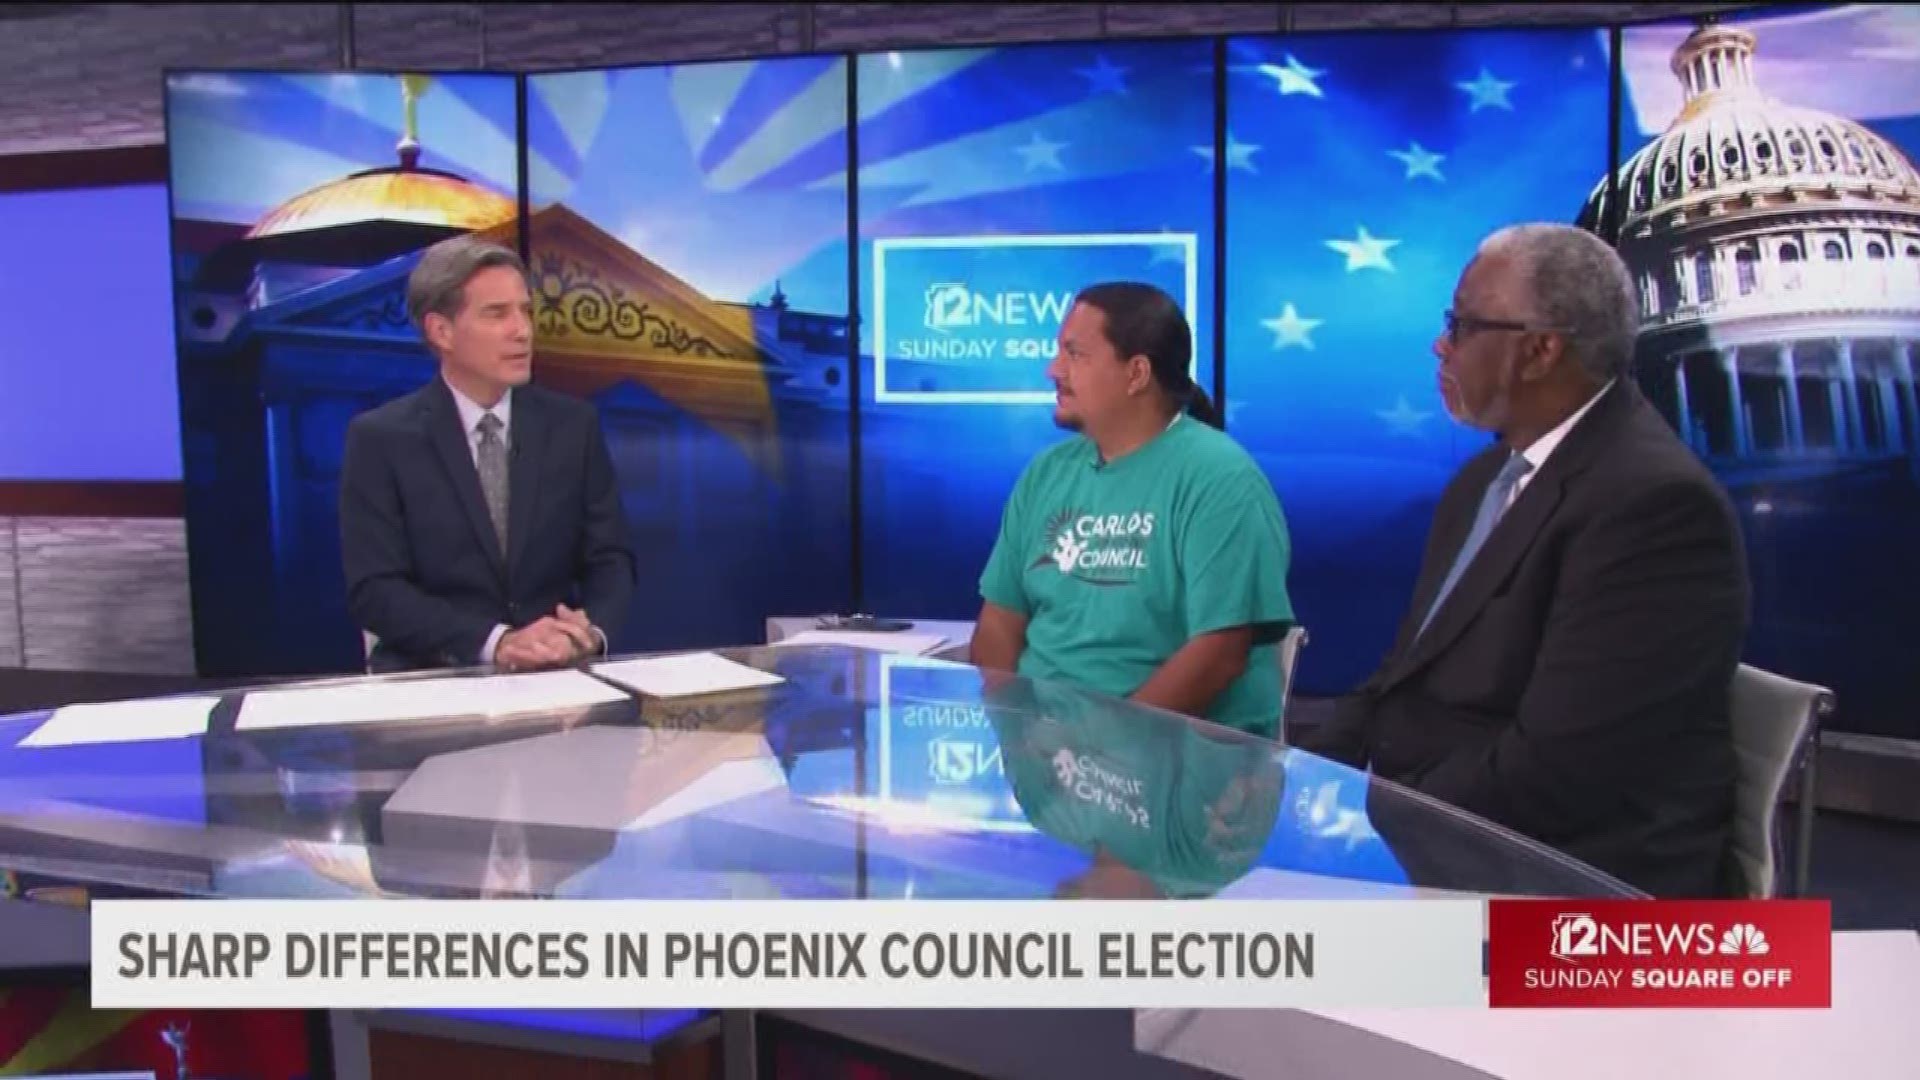 The race for Phoenix’s District 8 council seat from south Phoenix reveals sharp contrasts between the two candidates, migrant rights activist Carlos Garcia and retired police detective Michael Johnson, who’s seeking a return to the council after a six-year absence. The runoff election is May 21. Early ballots go out April 24.